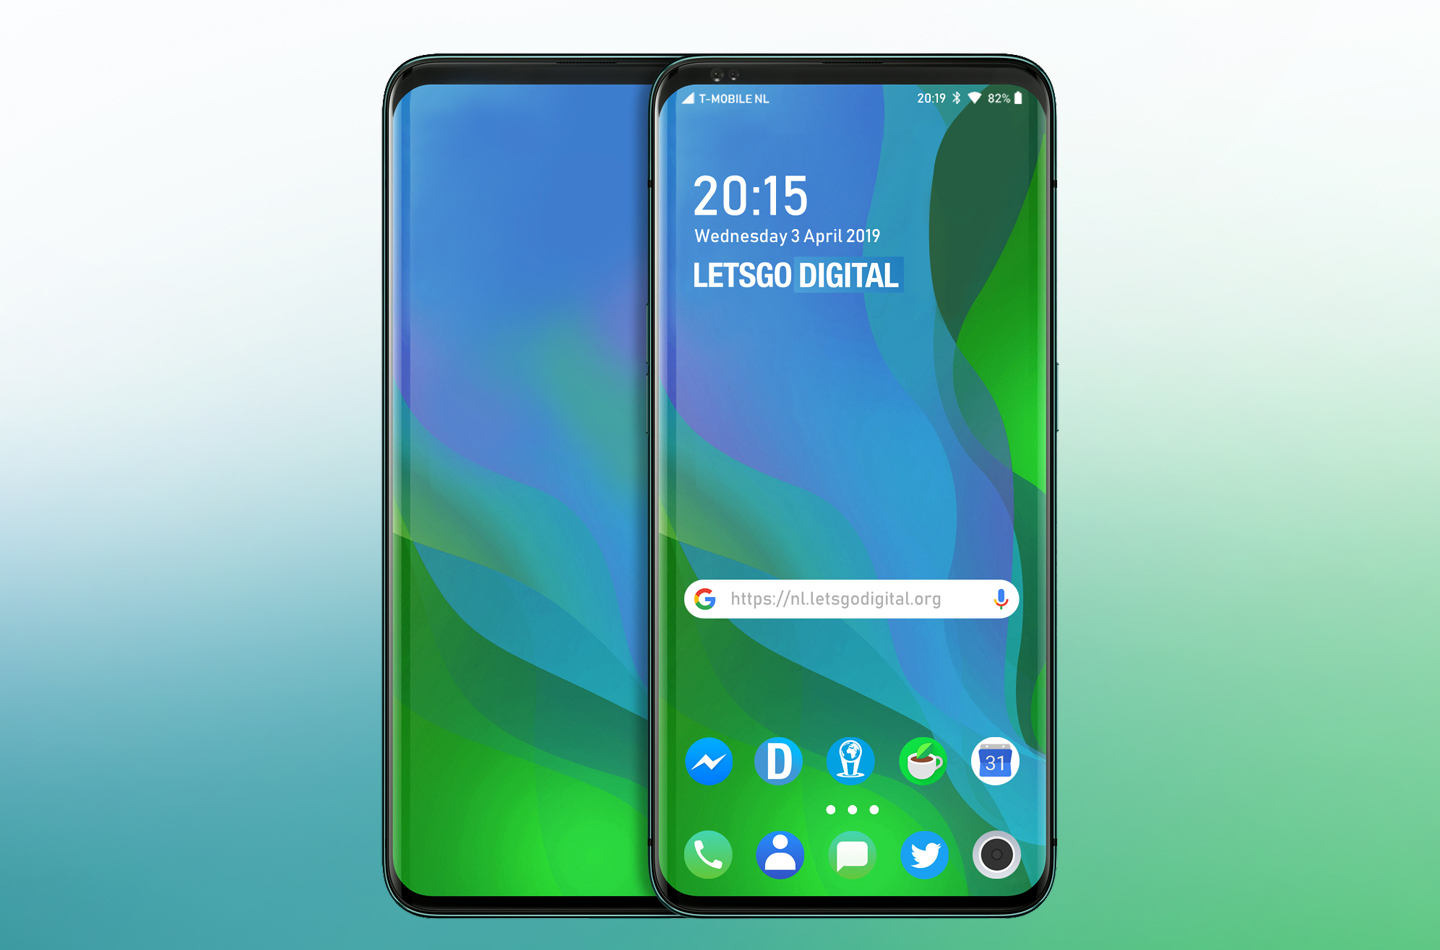 Future Oppo phones could have a insane design we’ve never seen before